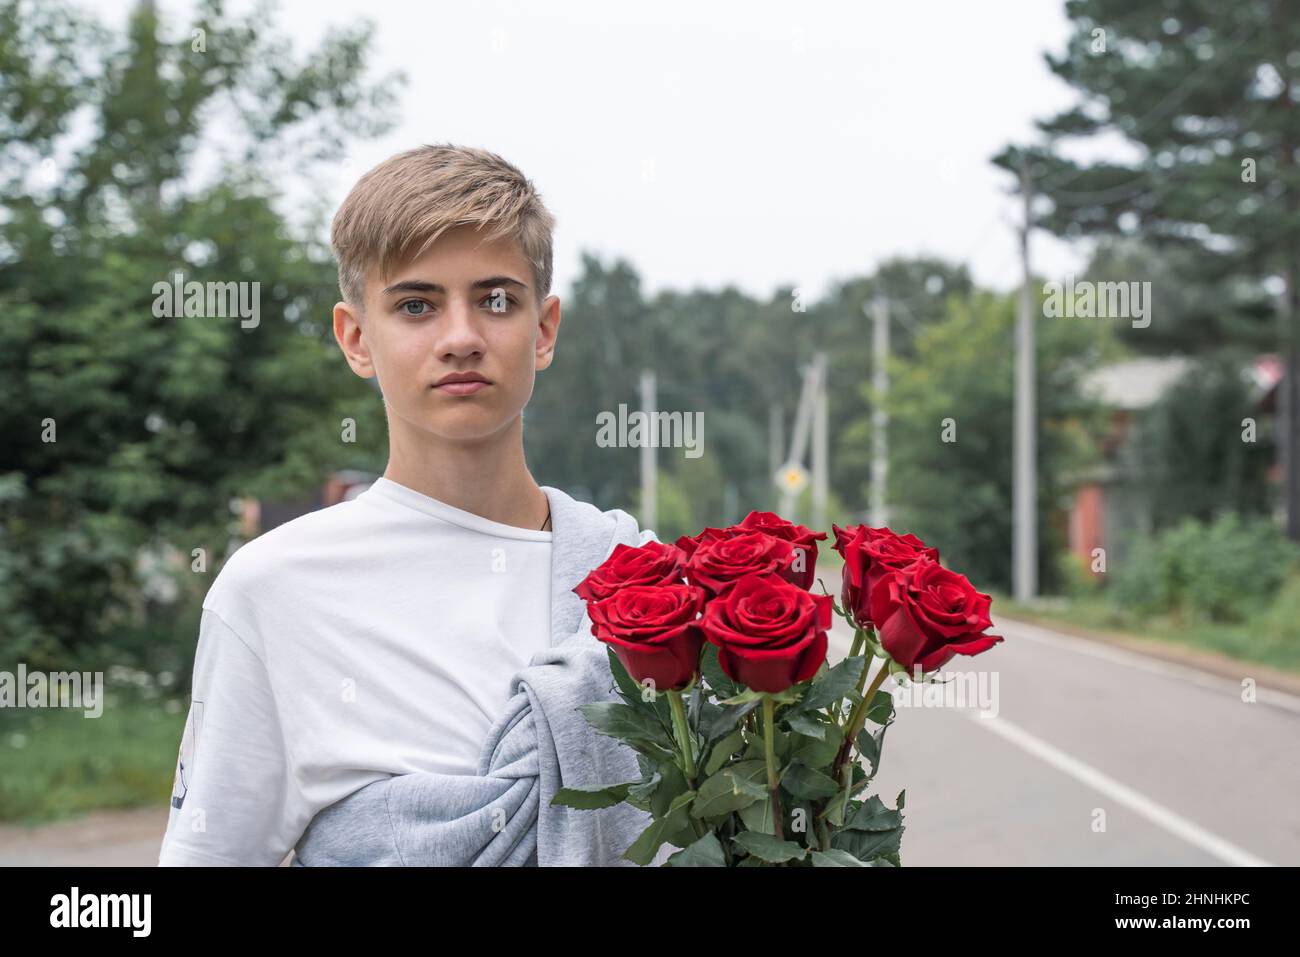 Handsome teenager holds a bouquet of red roses in his hands.  Stock Photo